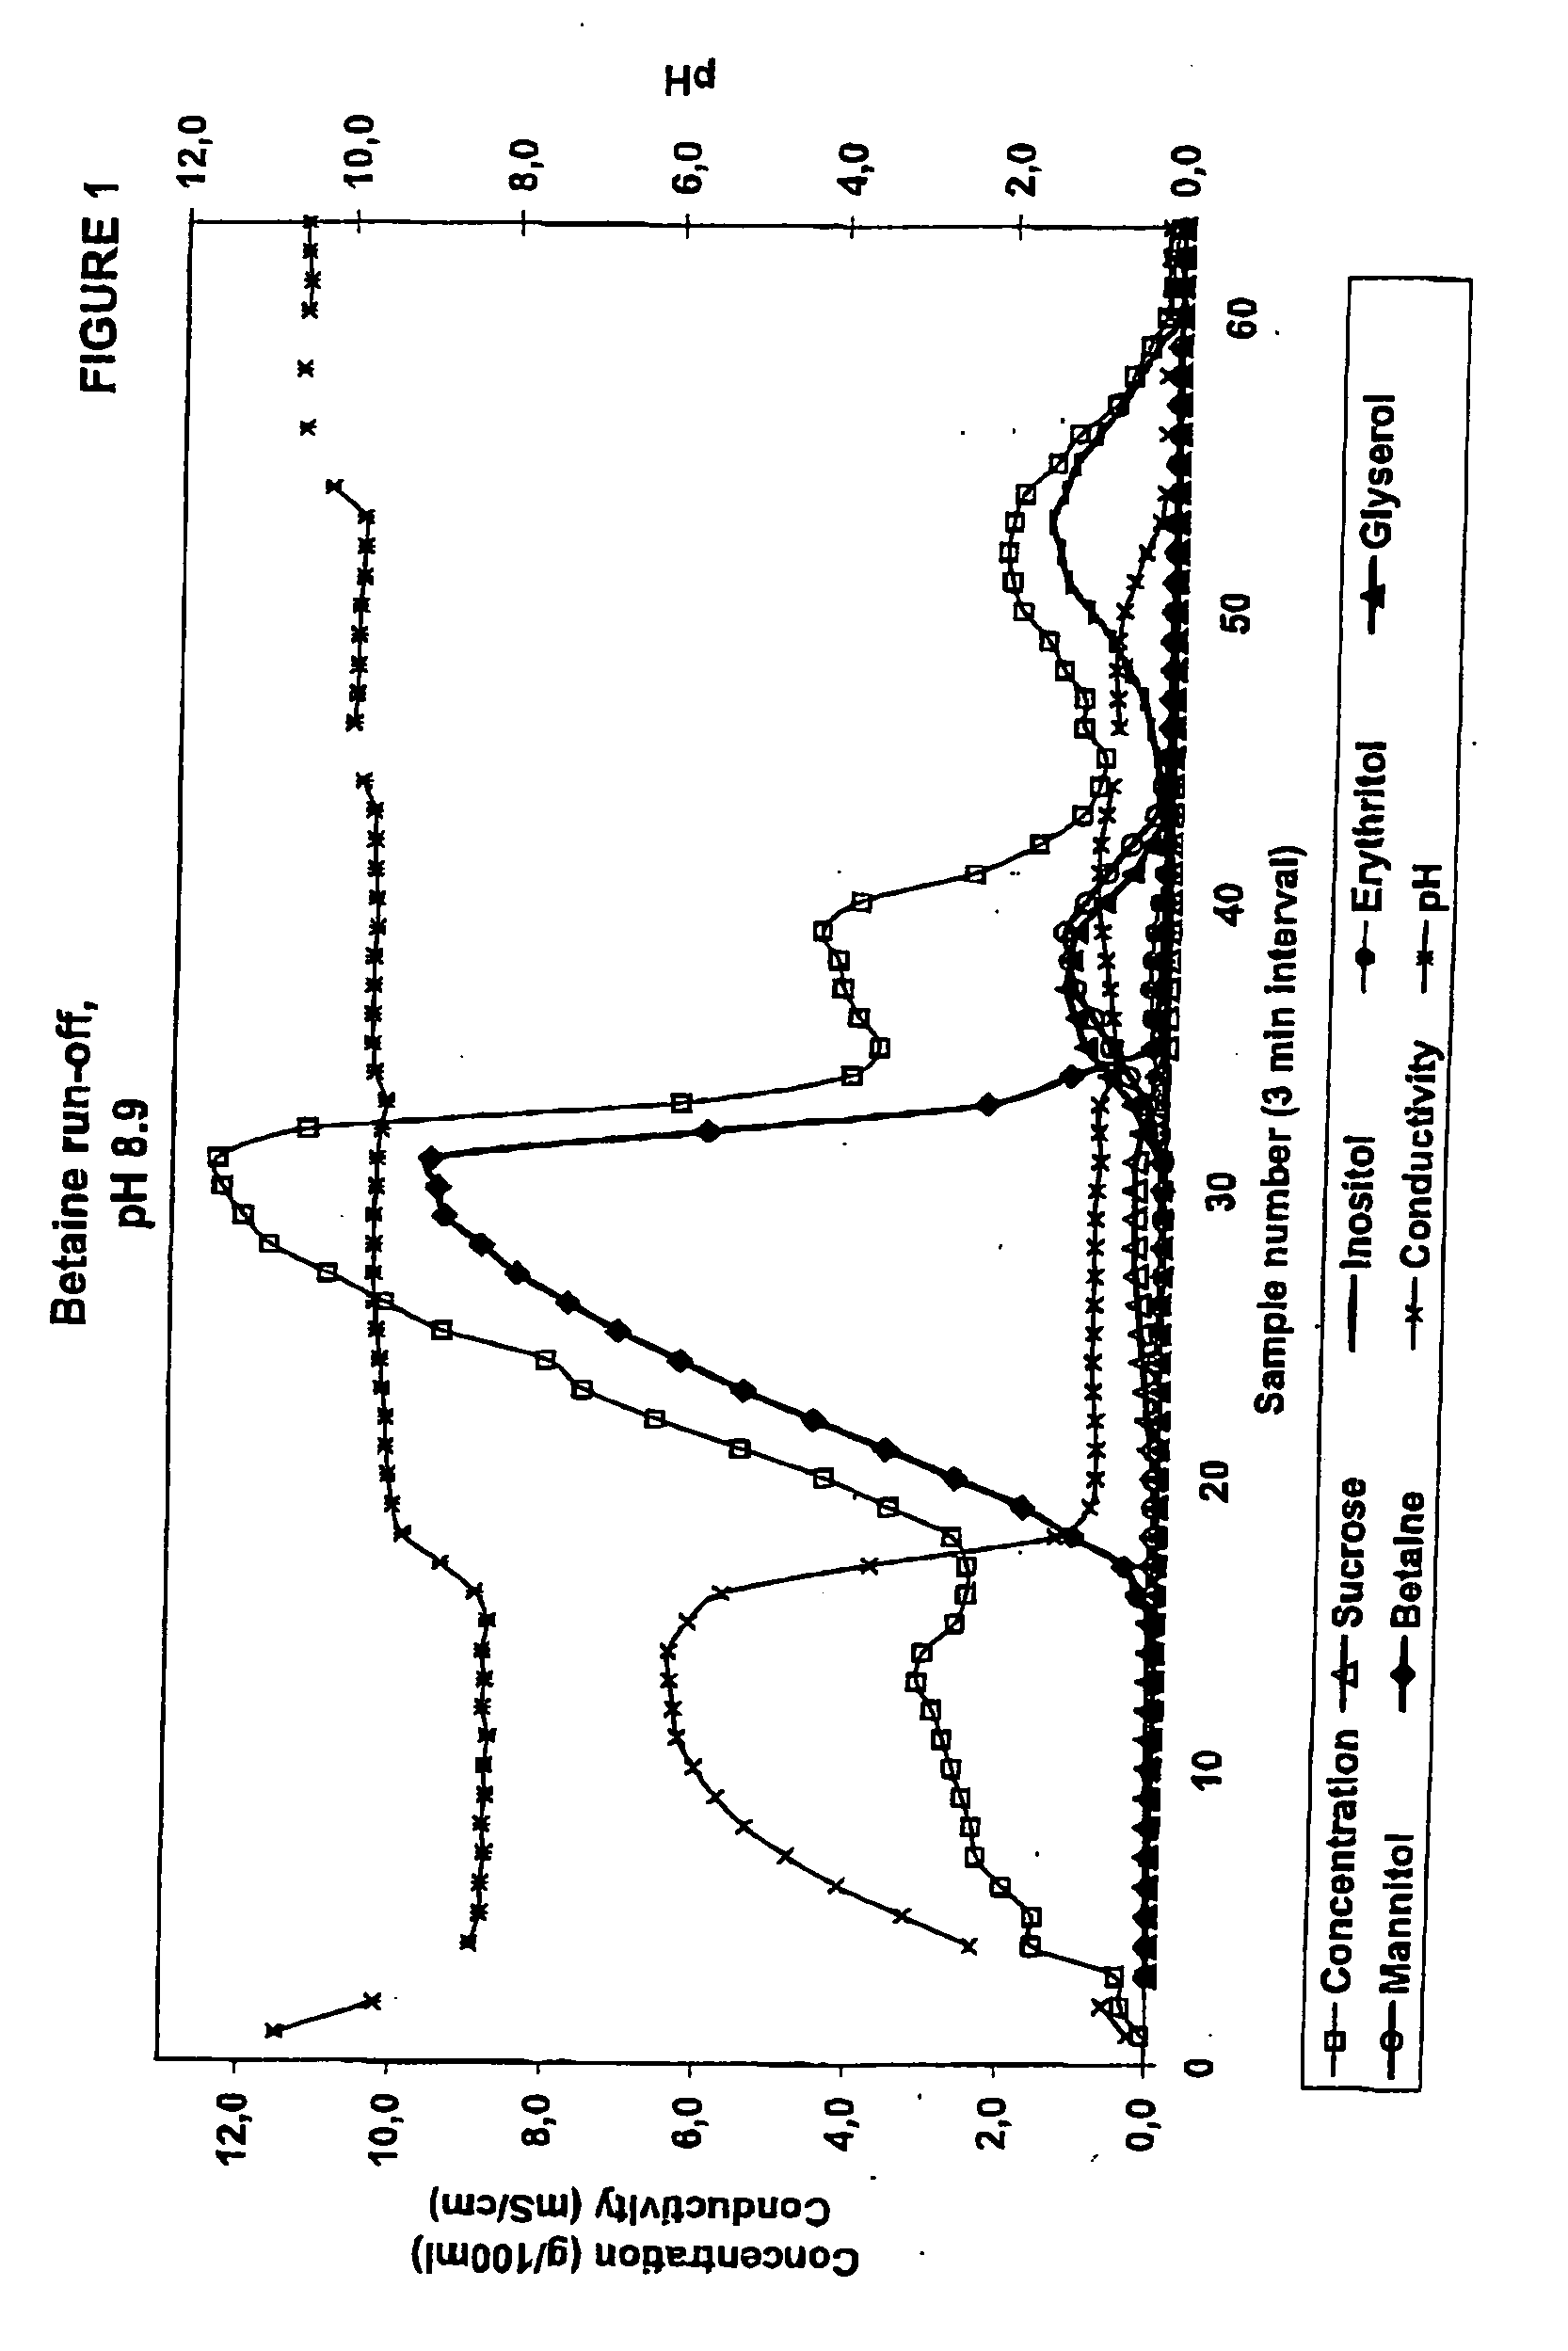 Method for separating betaine